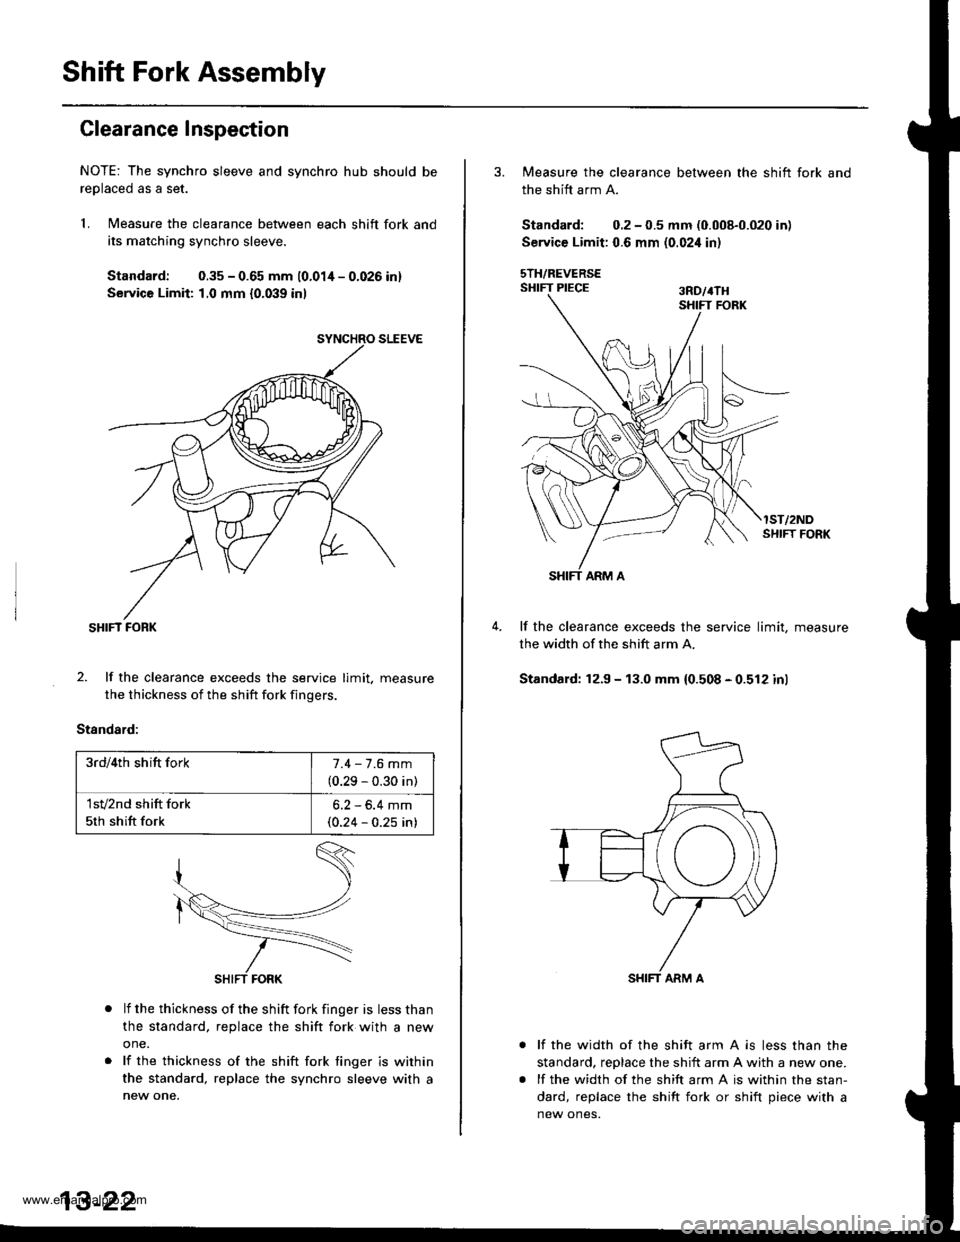 HONDA CR-V 1998 RD1-RD3 / 1.G Workshop Manual 
Shift Fork Assembly
Clearance Inspection
NOTE: The synchro sleeve and synchro hub should be
reolaced as a set.
1. Measure the clearance between each shift fork and
its matching synchro sleeve.
Standa